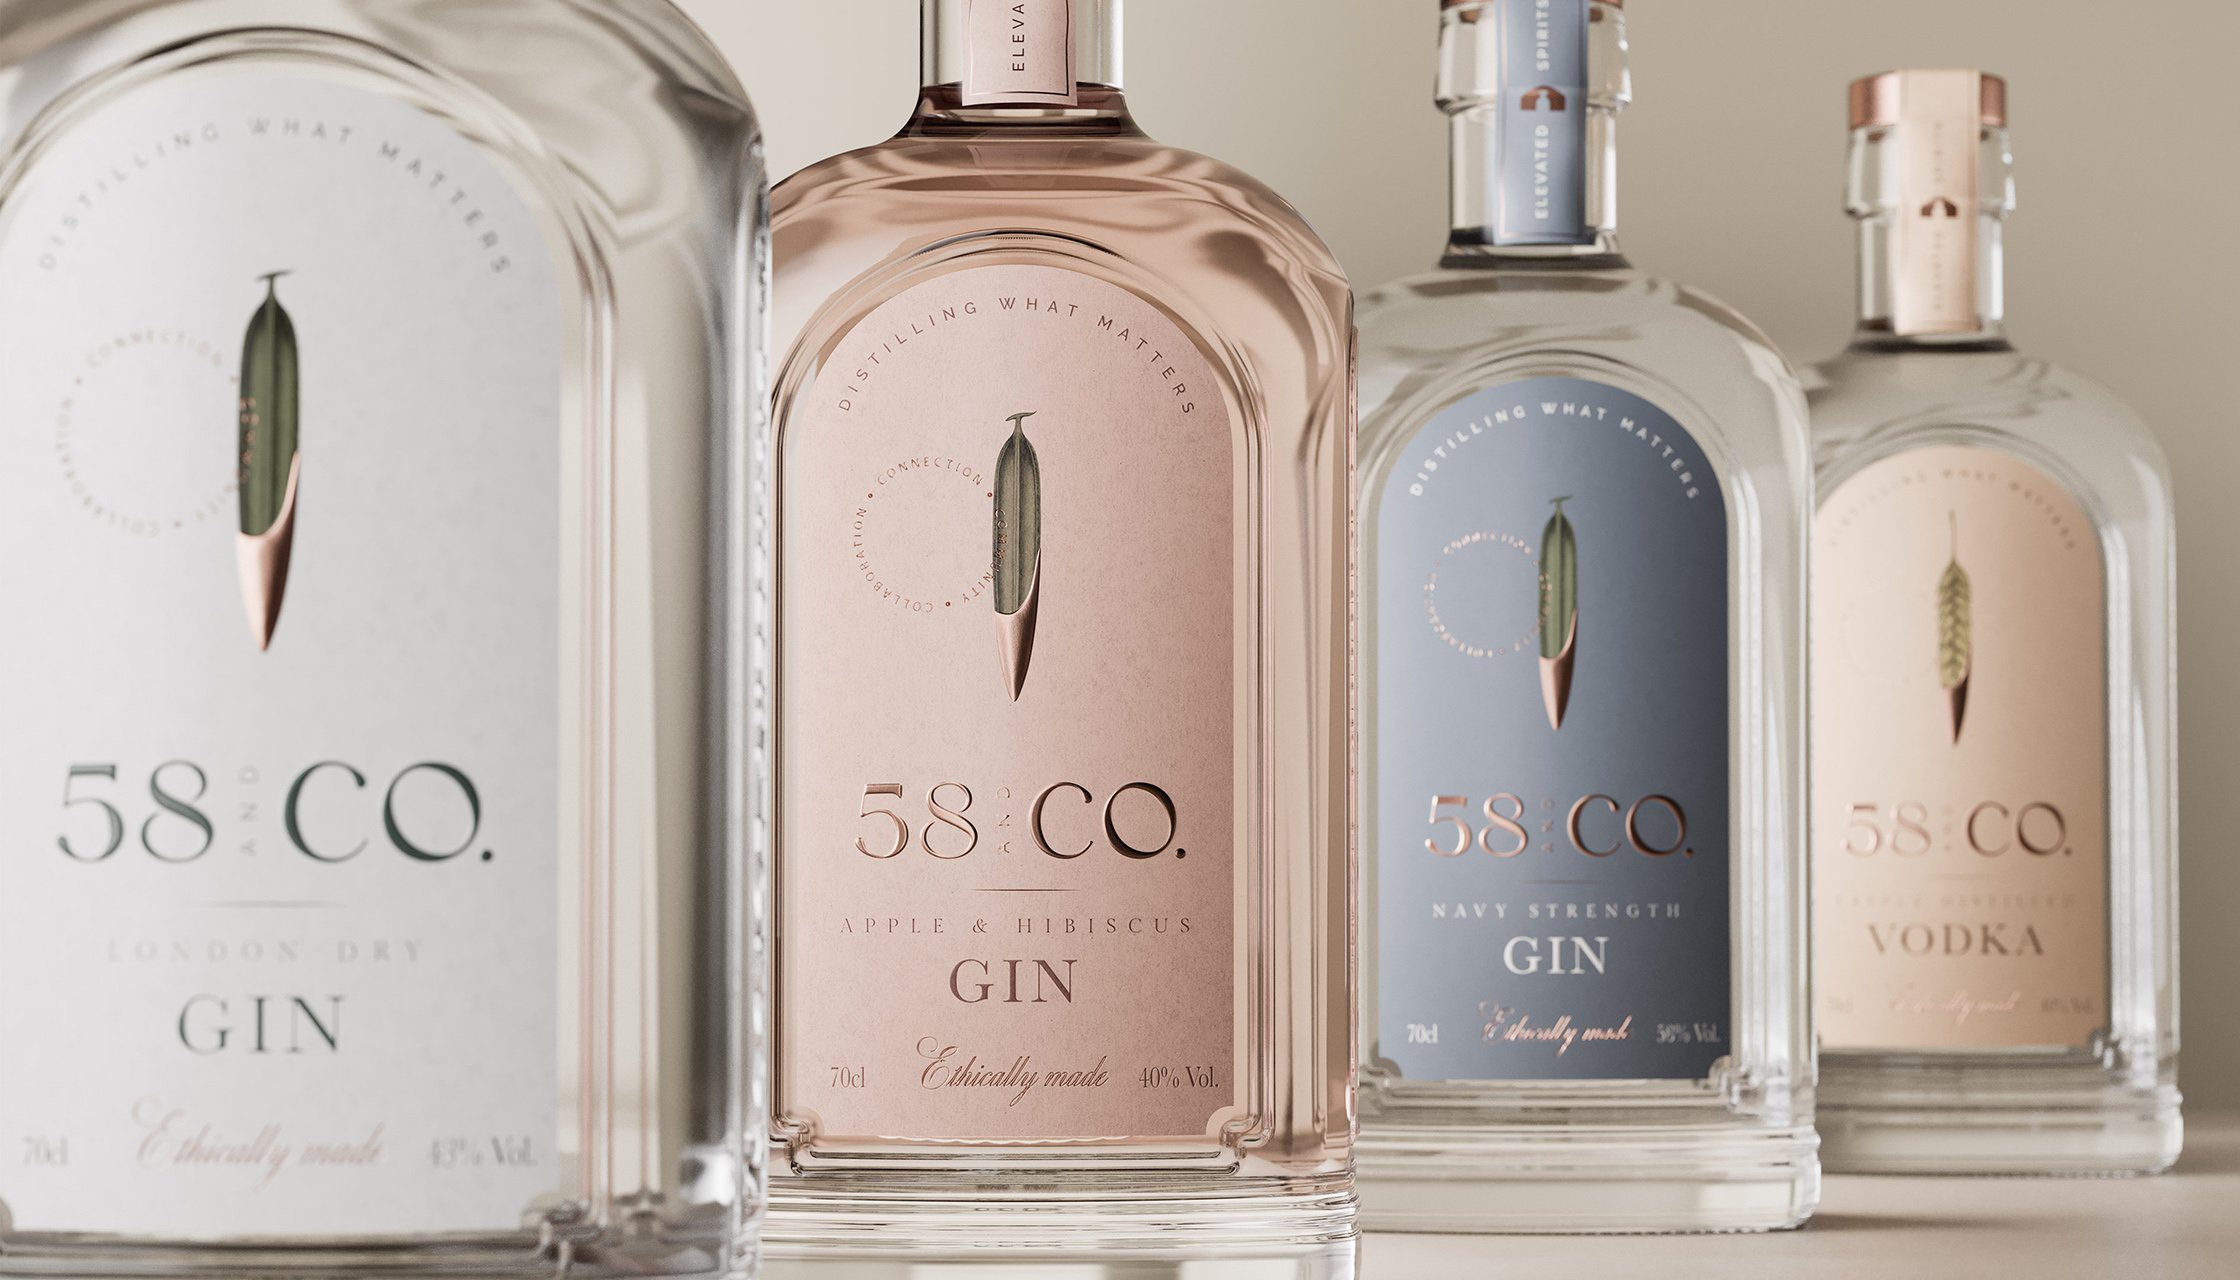 %8 and CO gin bottle line up